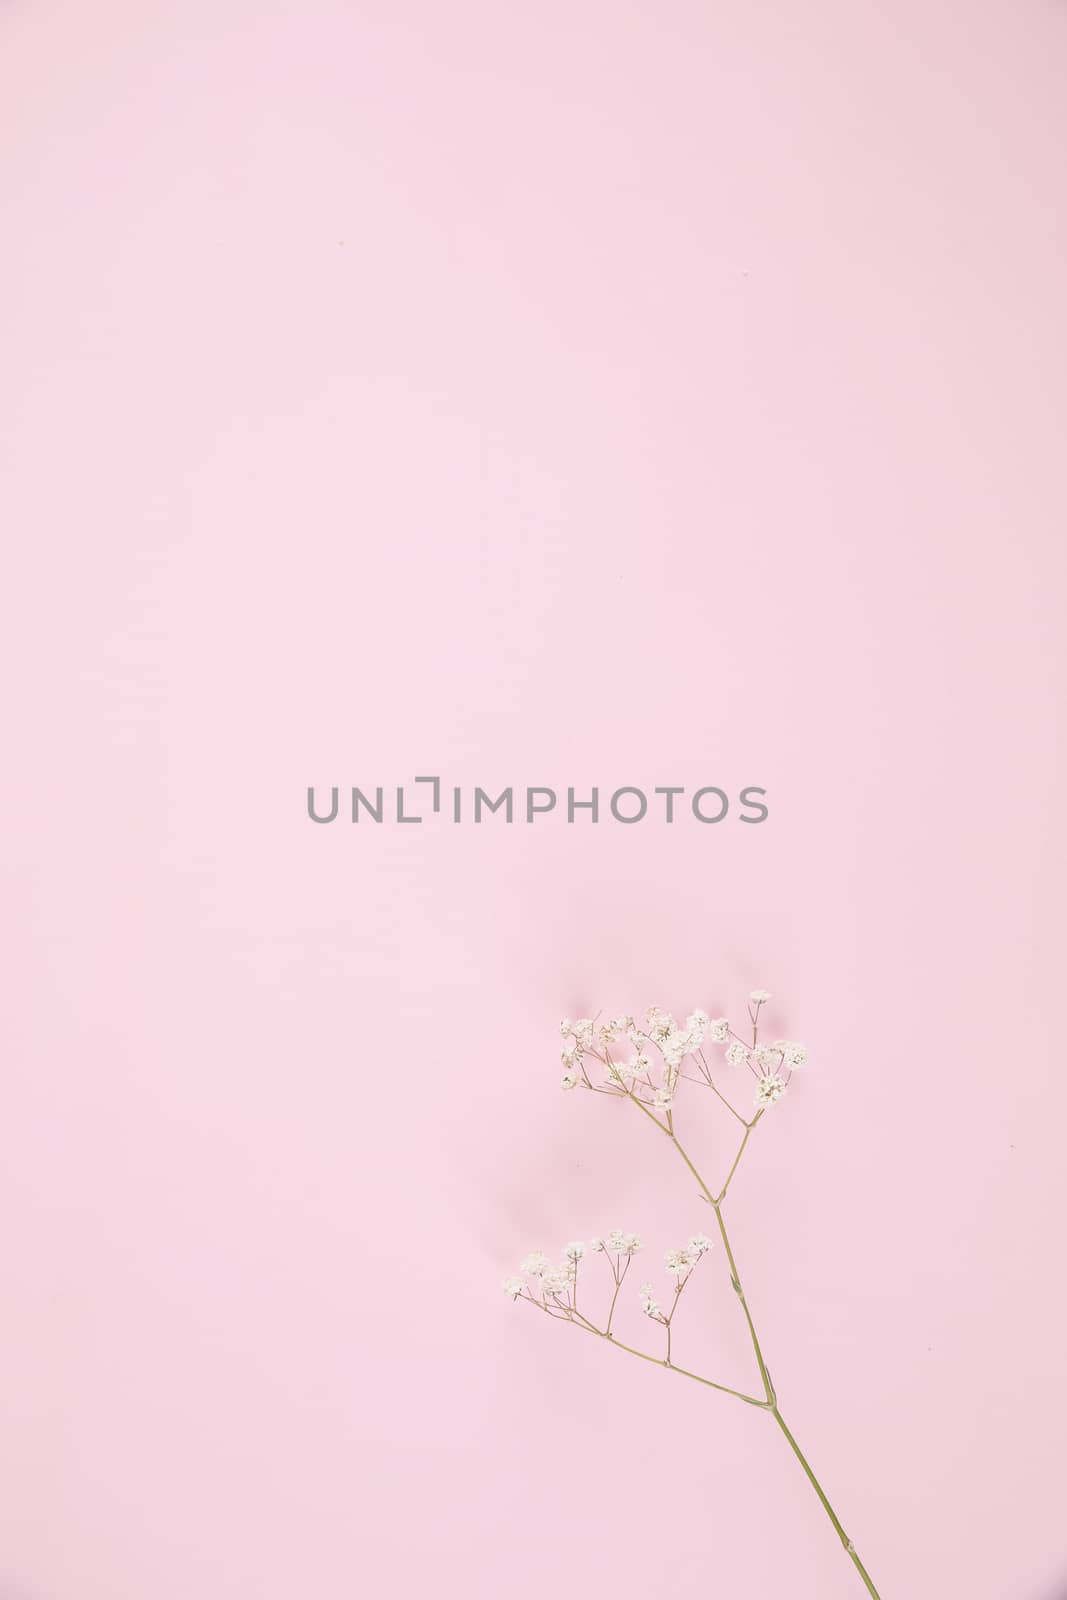 gypsophila little white flower plant isolated in pink background by piyato